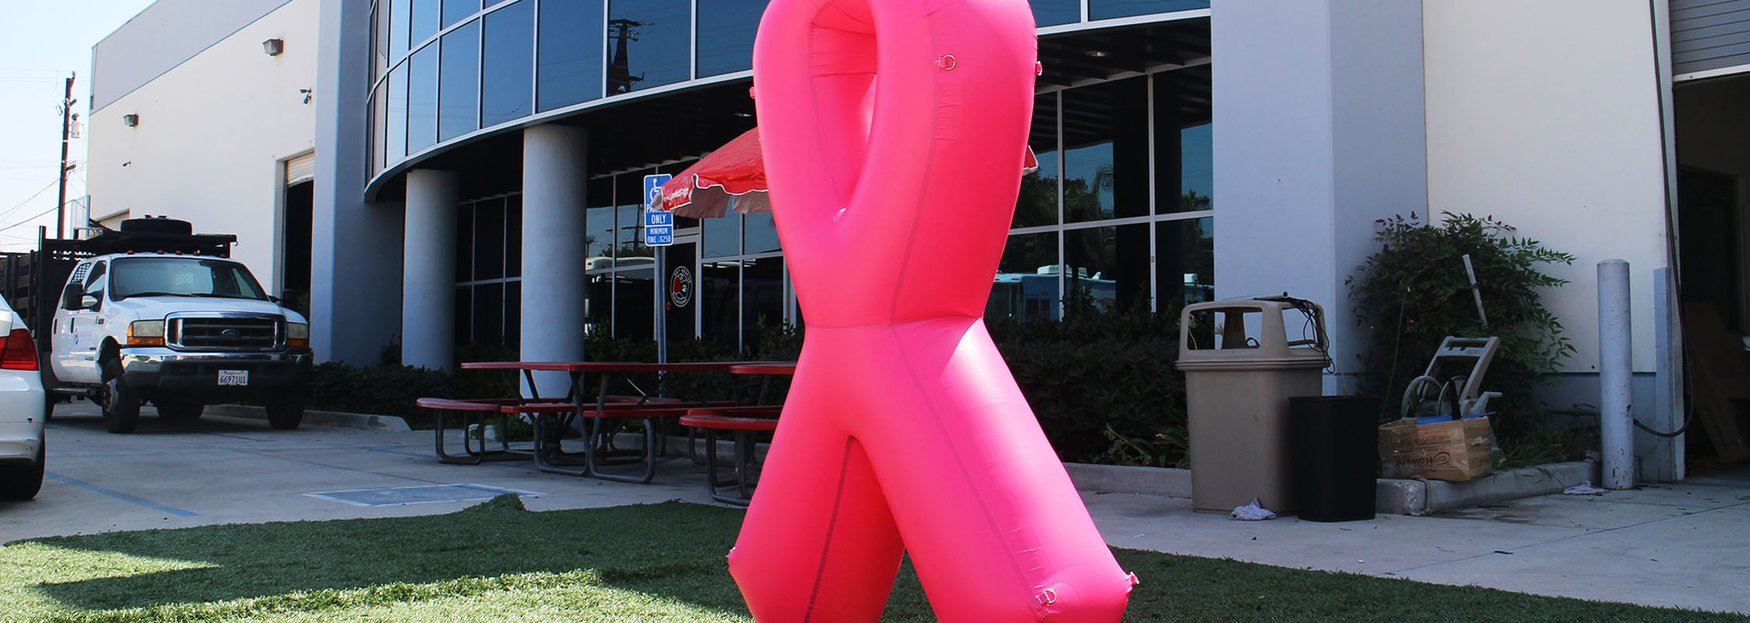 breast-cancer-ribbon-inflatable